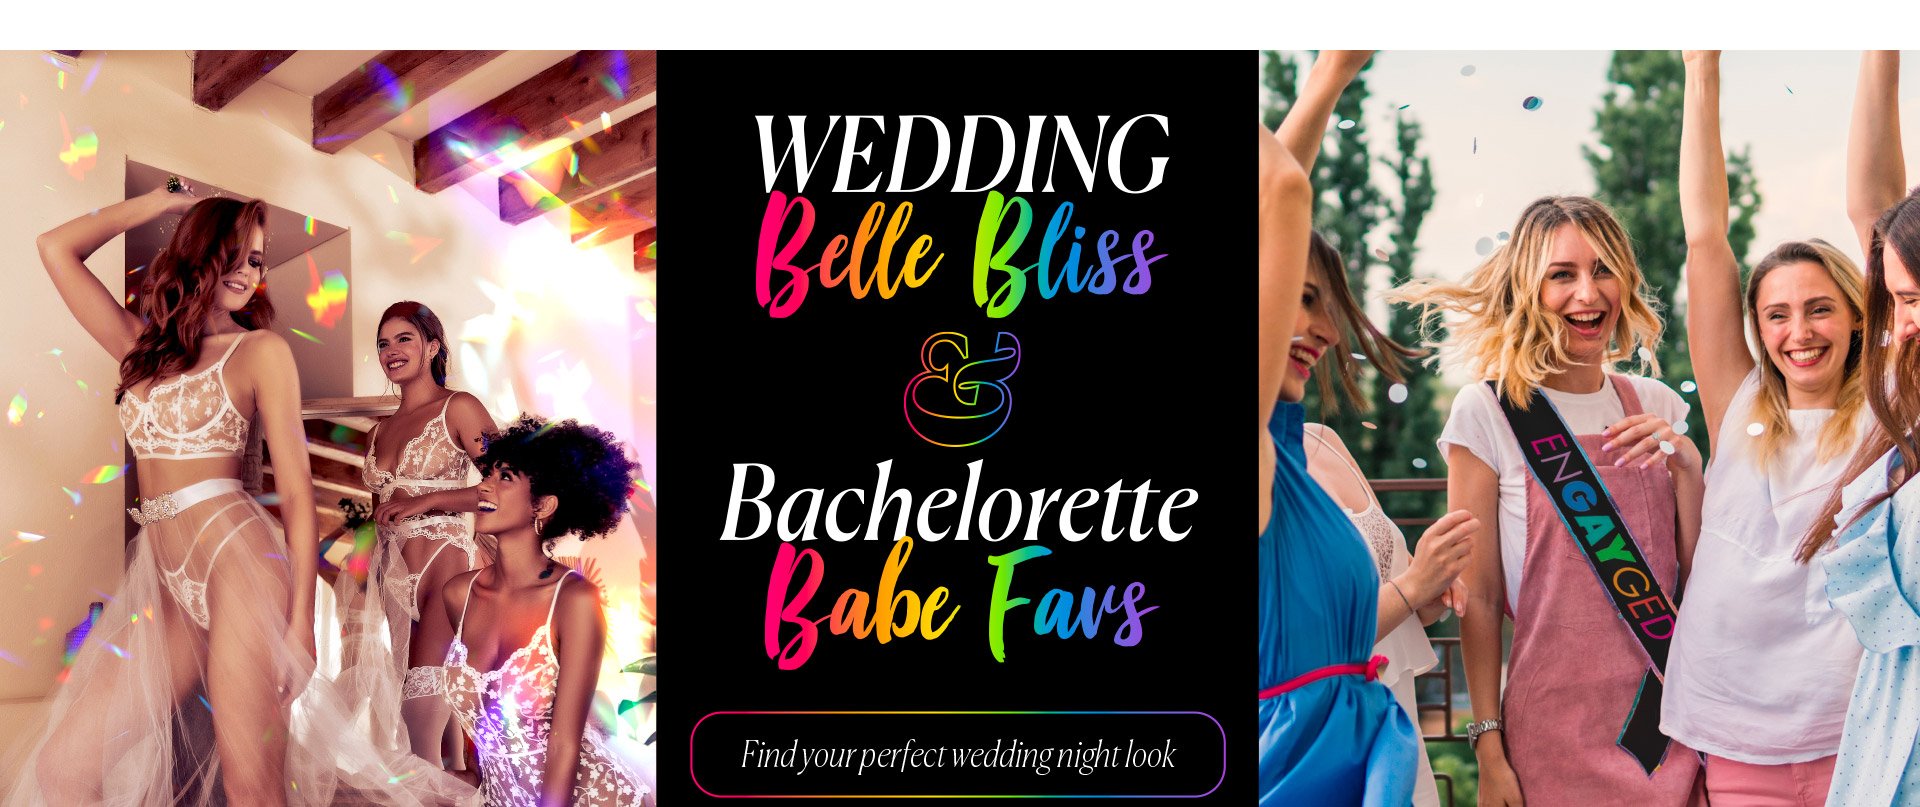 Wedding Belle Bliss & Bachelorette Babe Favs - Find Your Perfect wedding night look